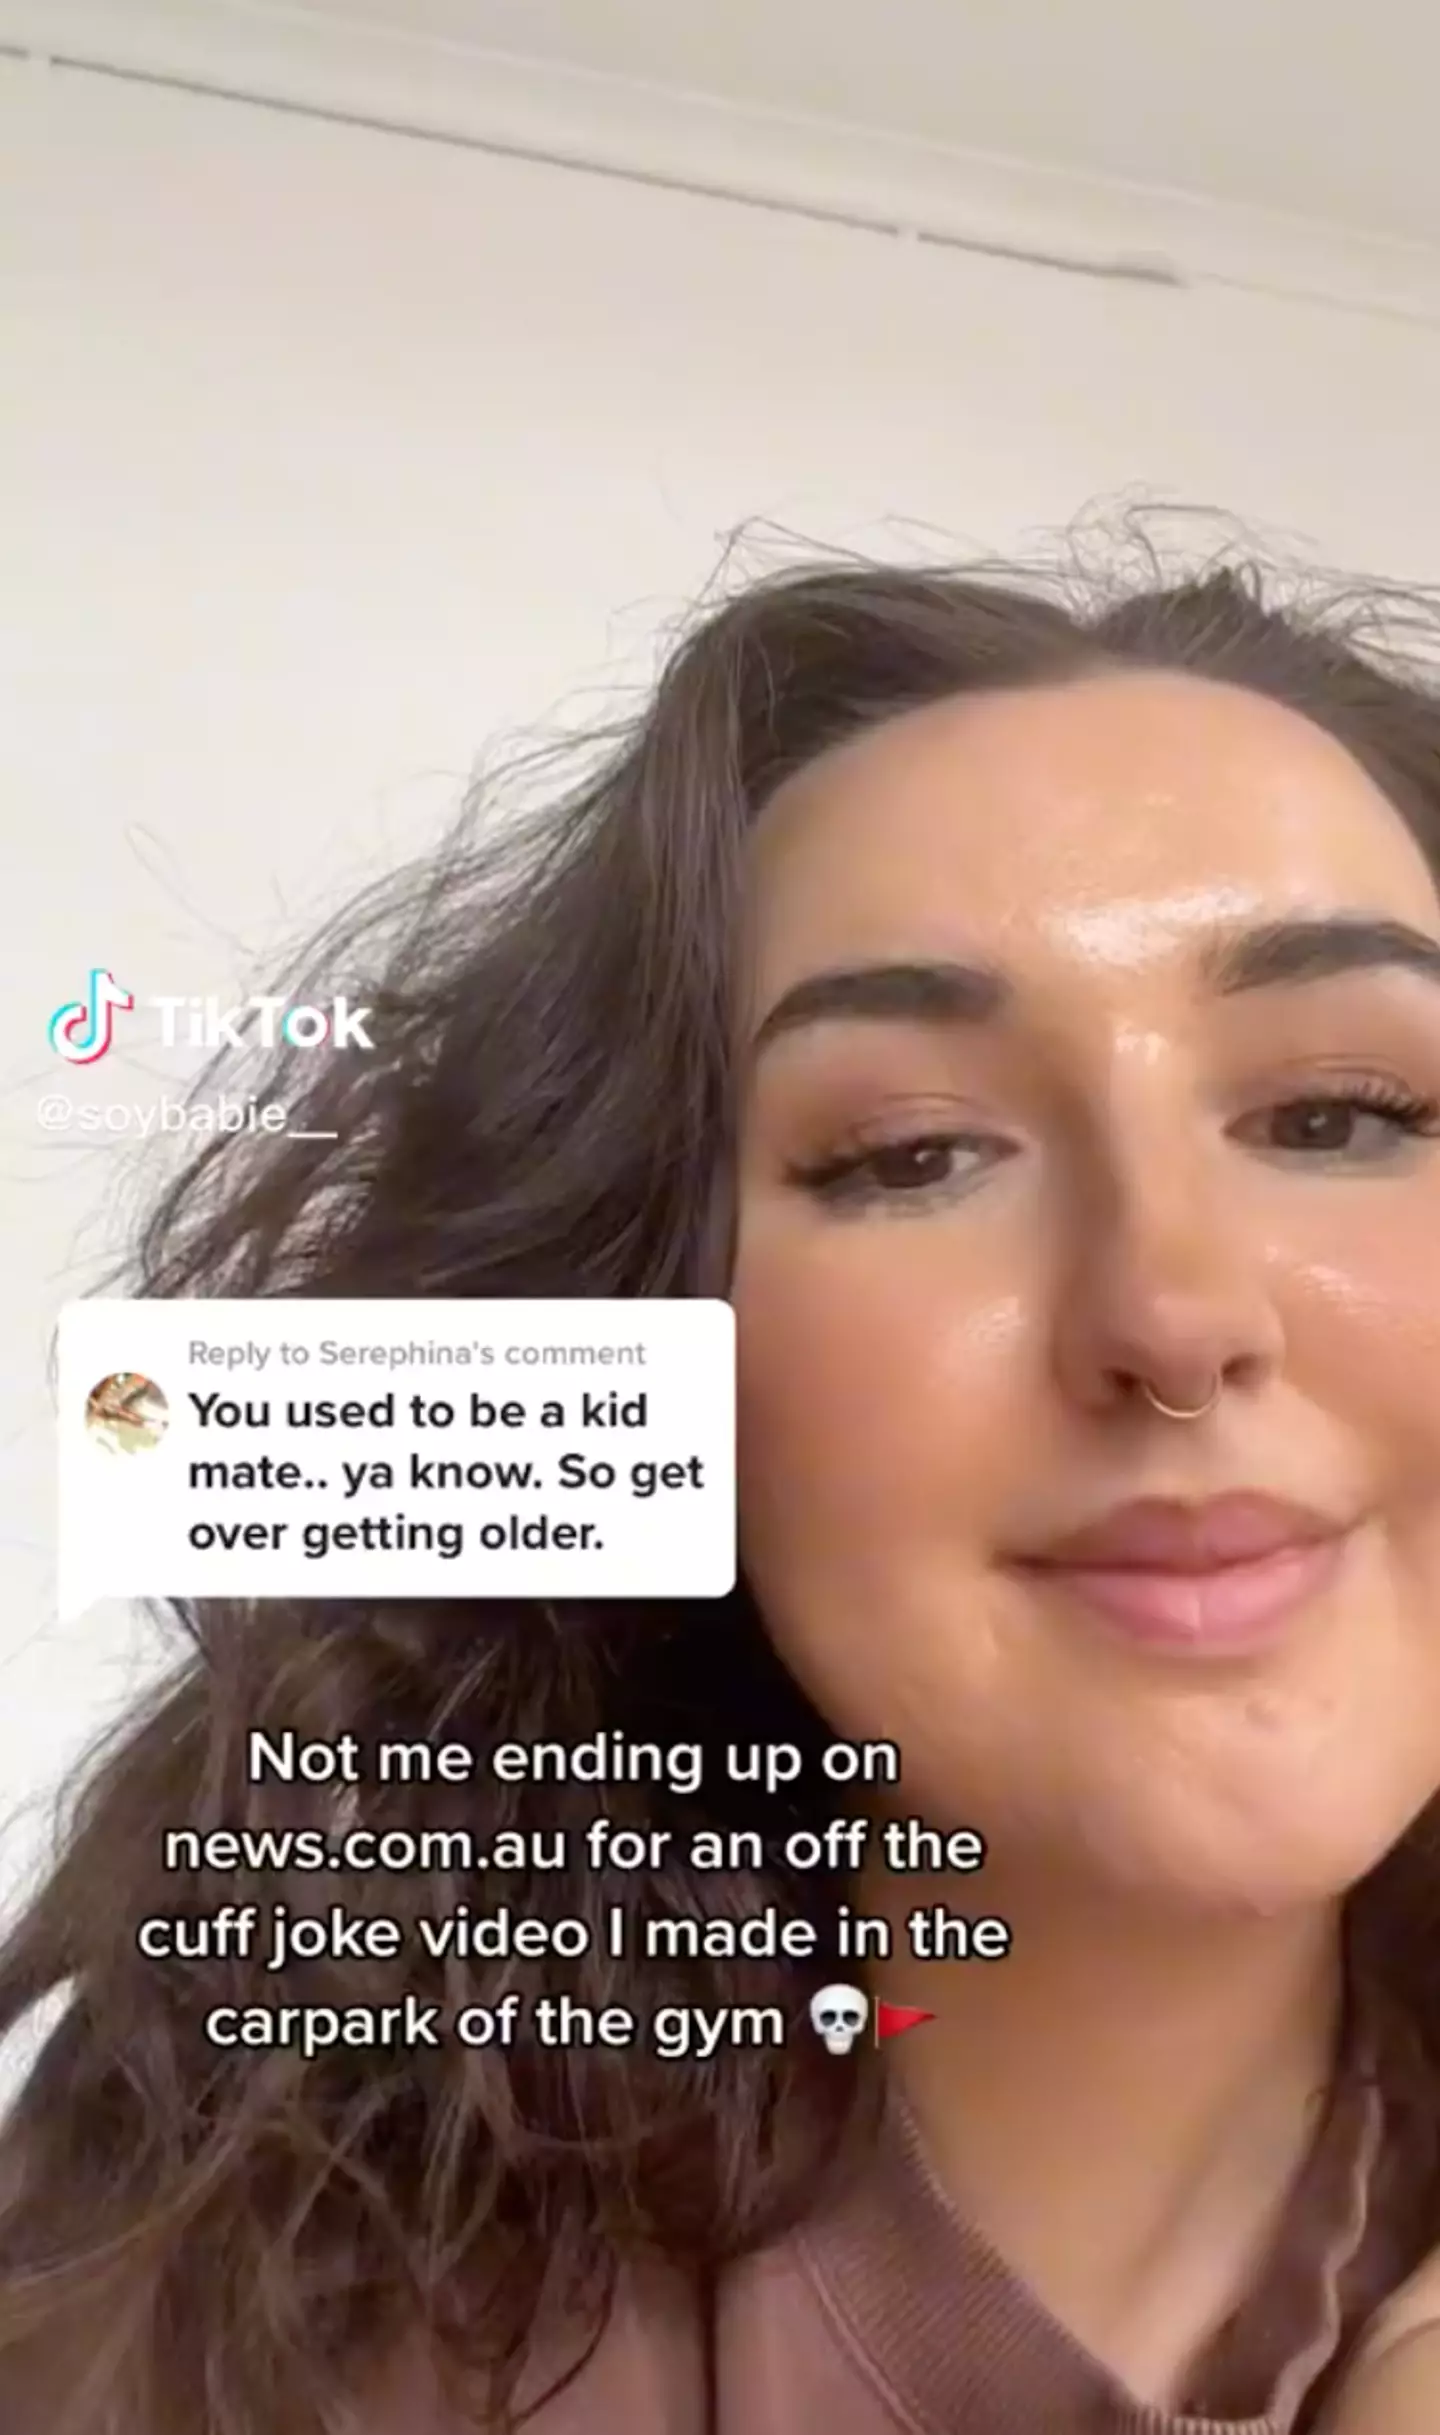 Since going viral her video has been covered in an Australian news outlet.